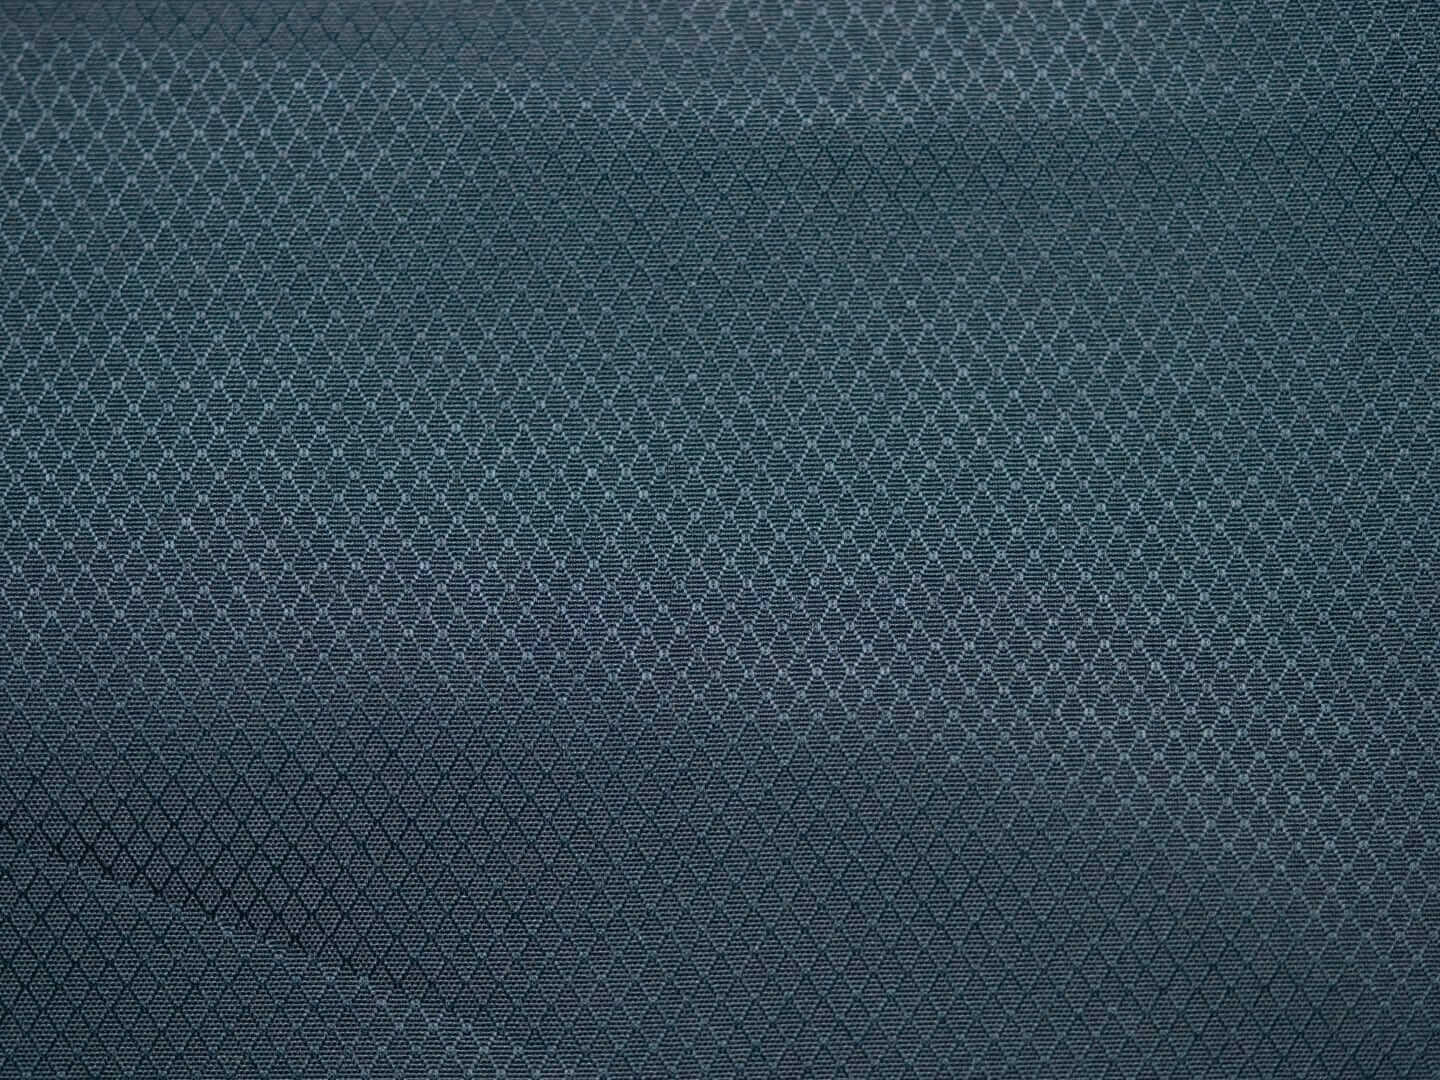 180gsm Coated Nylon Ripstop Fabric, 100% Polyester